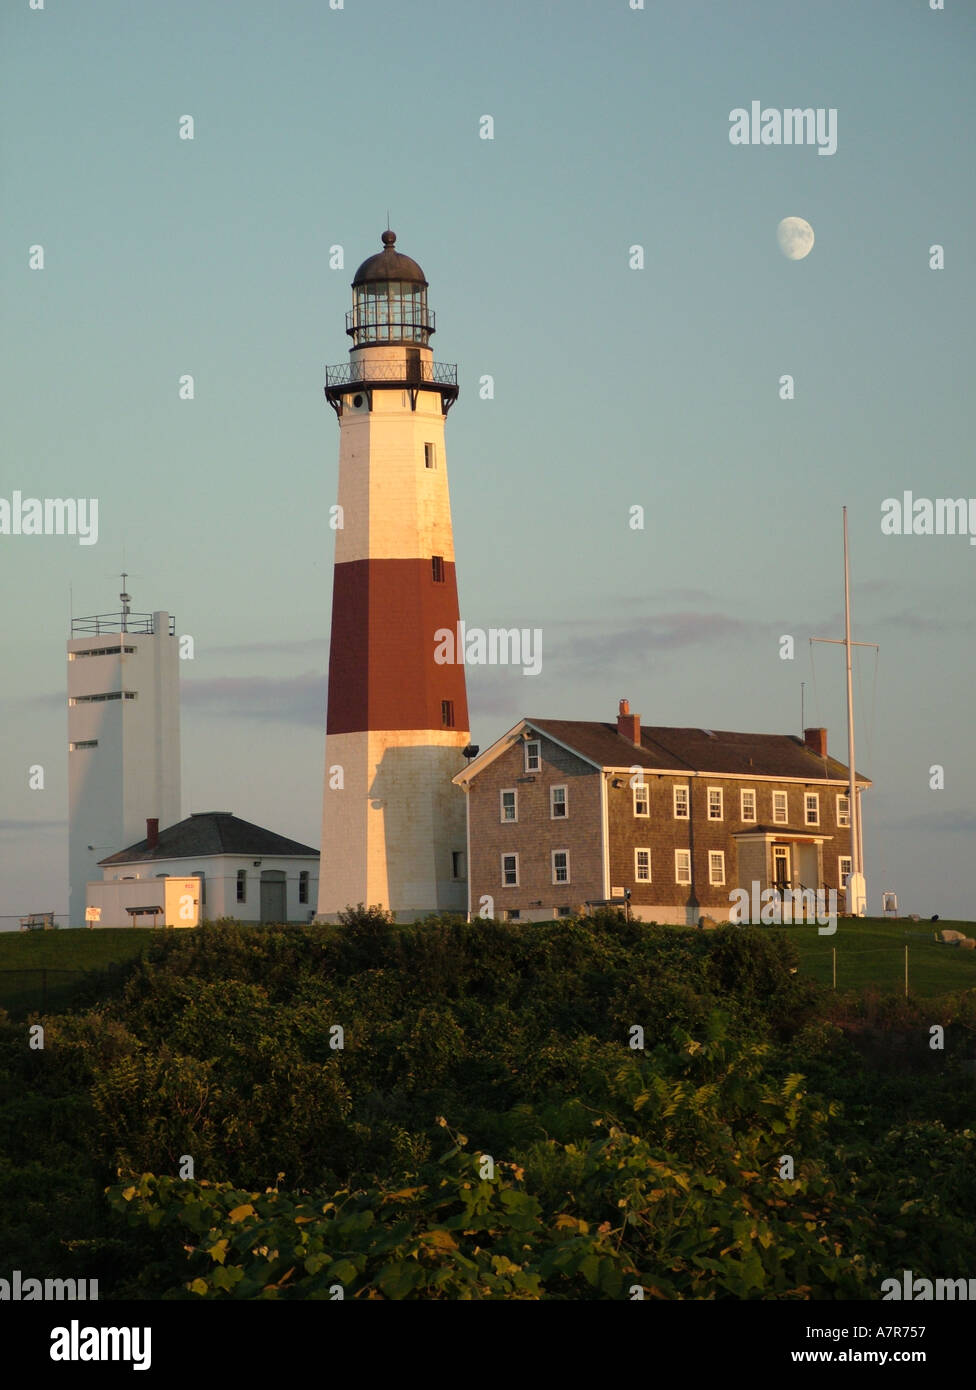 AJD37393, Montauk, NY, New York, Long Island Banque D'Images